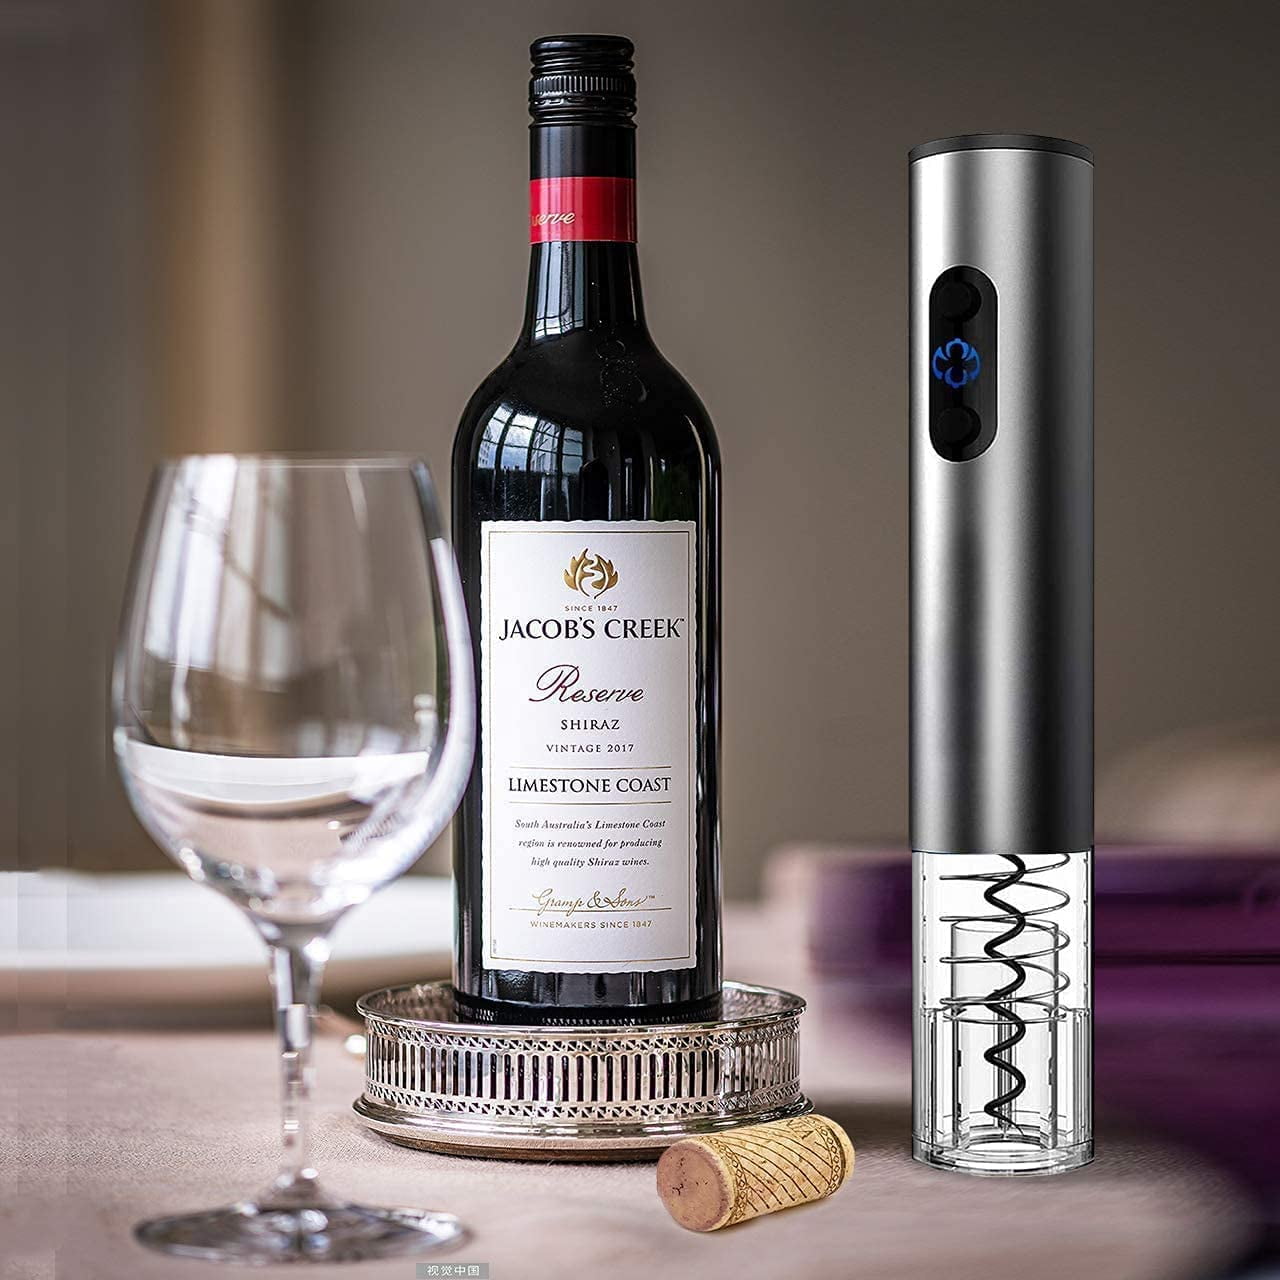 Rocyis Electric Wine Opener-Wine Gifts-Automatic Wine Opener Rechargeable-Cordless Electric Corkscrew-Wine Bottle Opener with Foil Cutter, 2 in 1